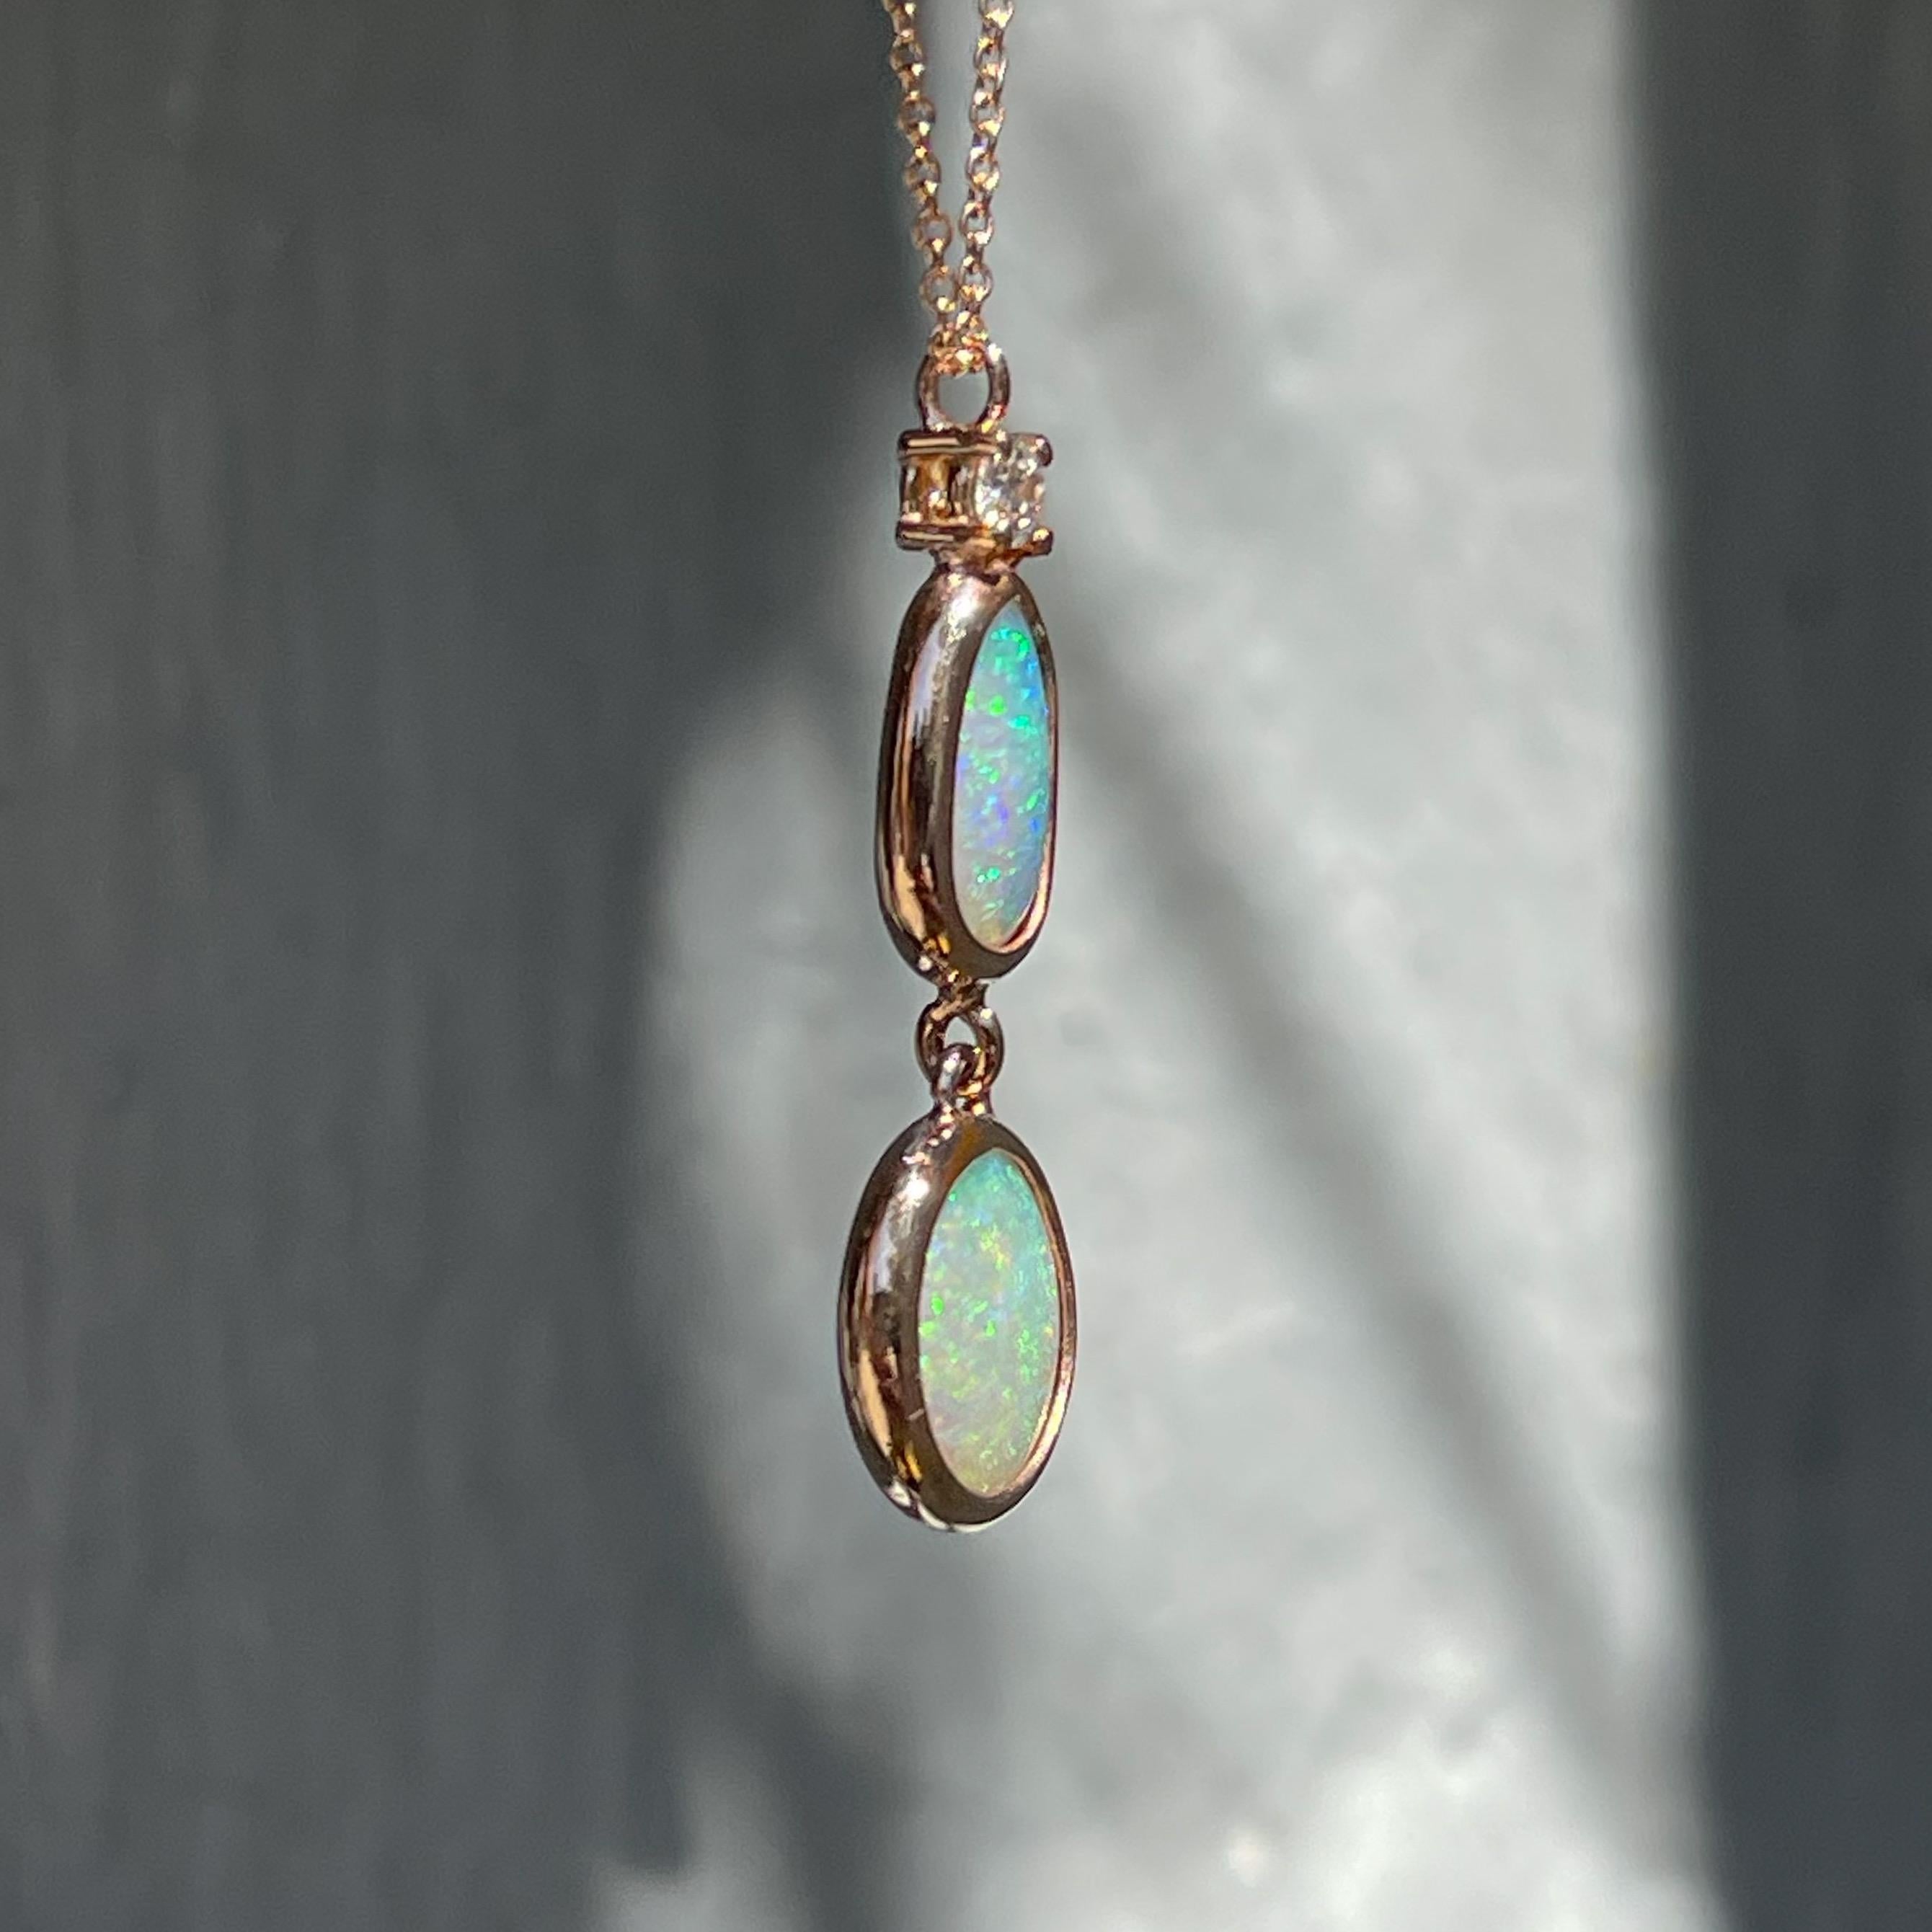 NIXIN Jewelry Cadence Australian Opal Necklace with Diamond Pendant in Rose Gold 2